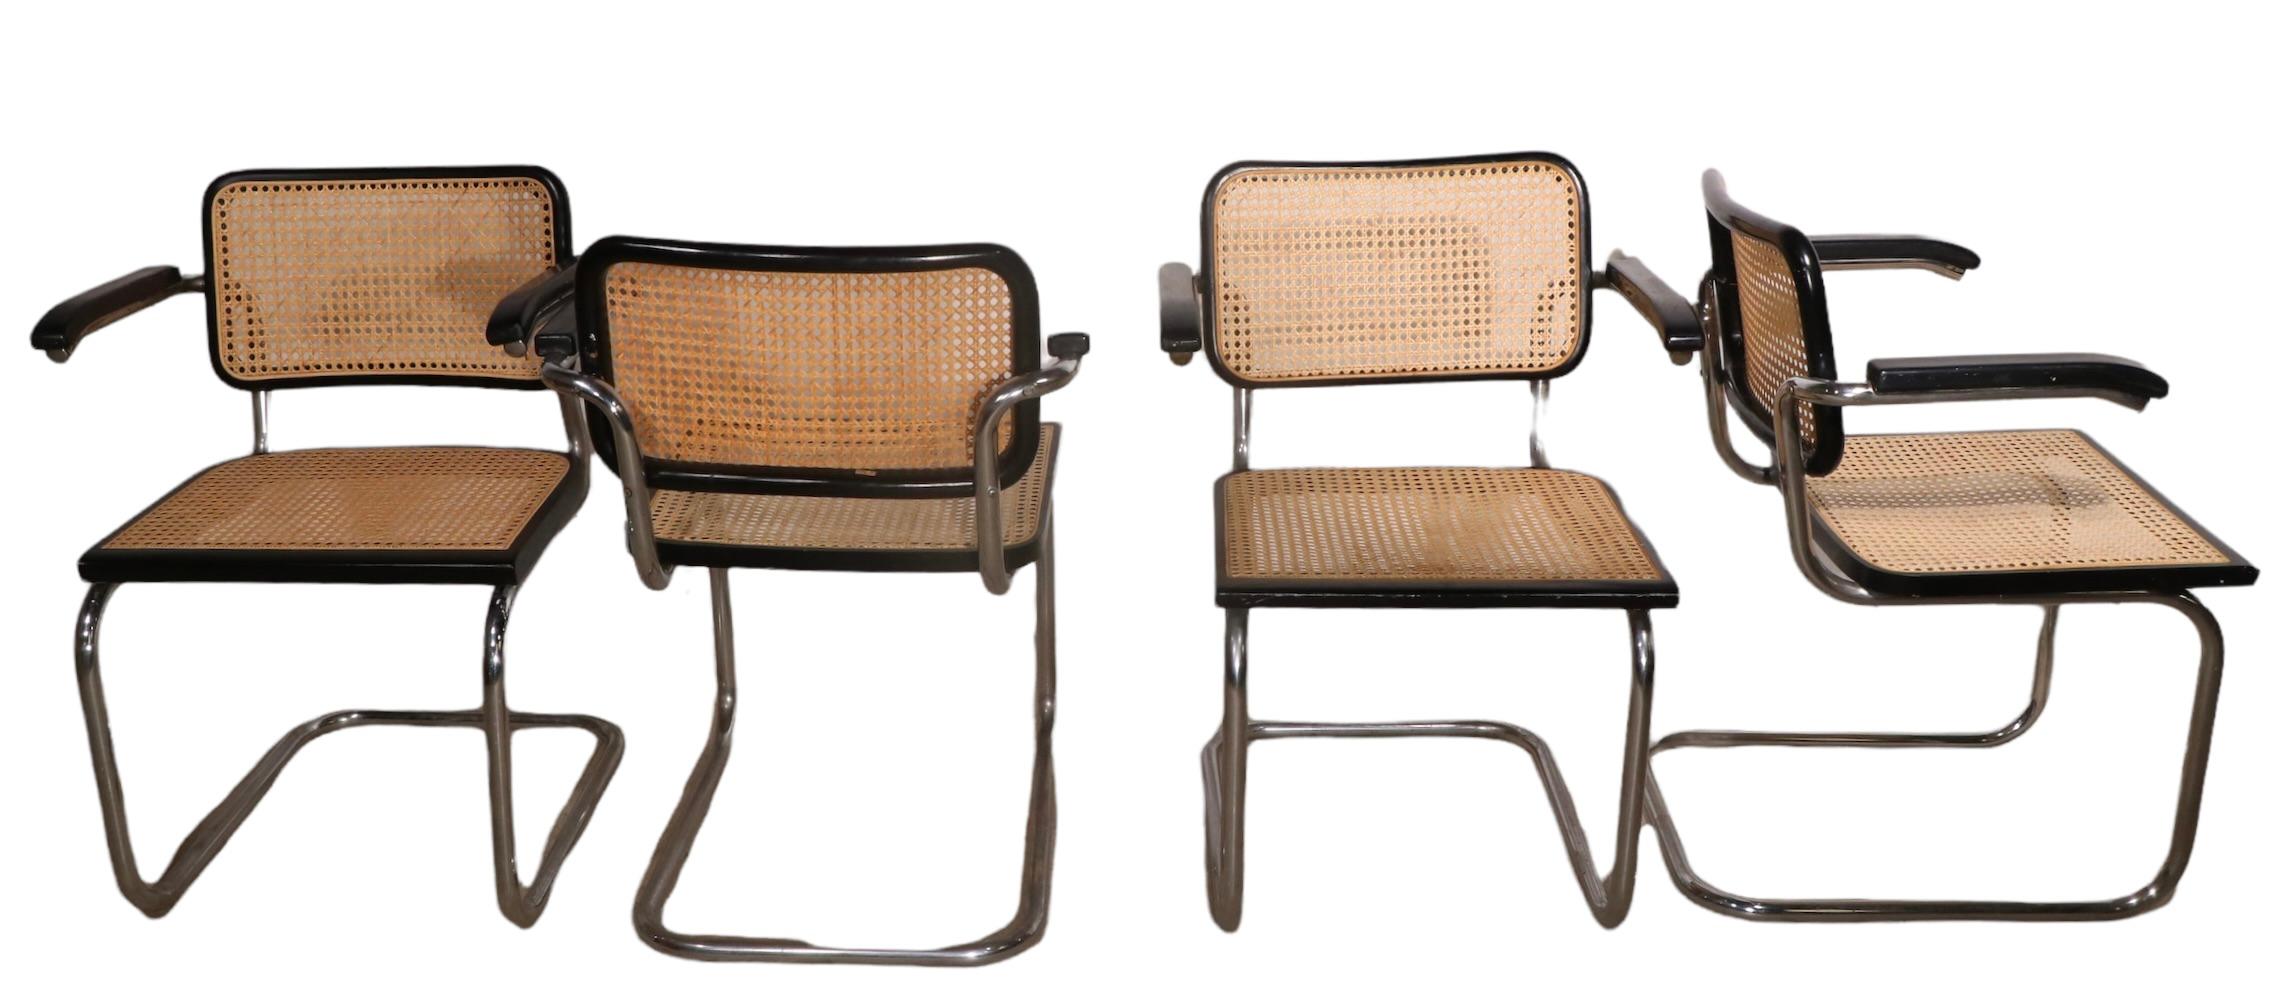 Set of Four Cesca Chairs Designed by Marcel Breuer Made in Italy 1